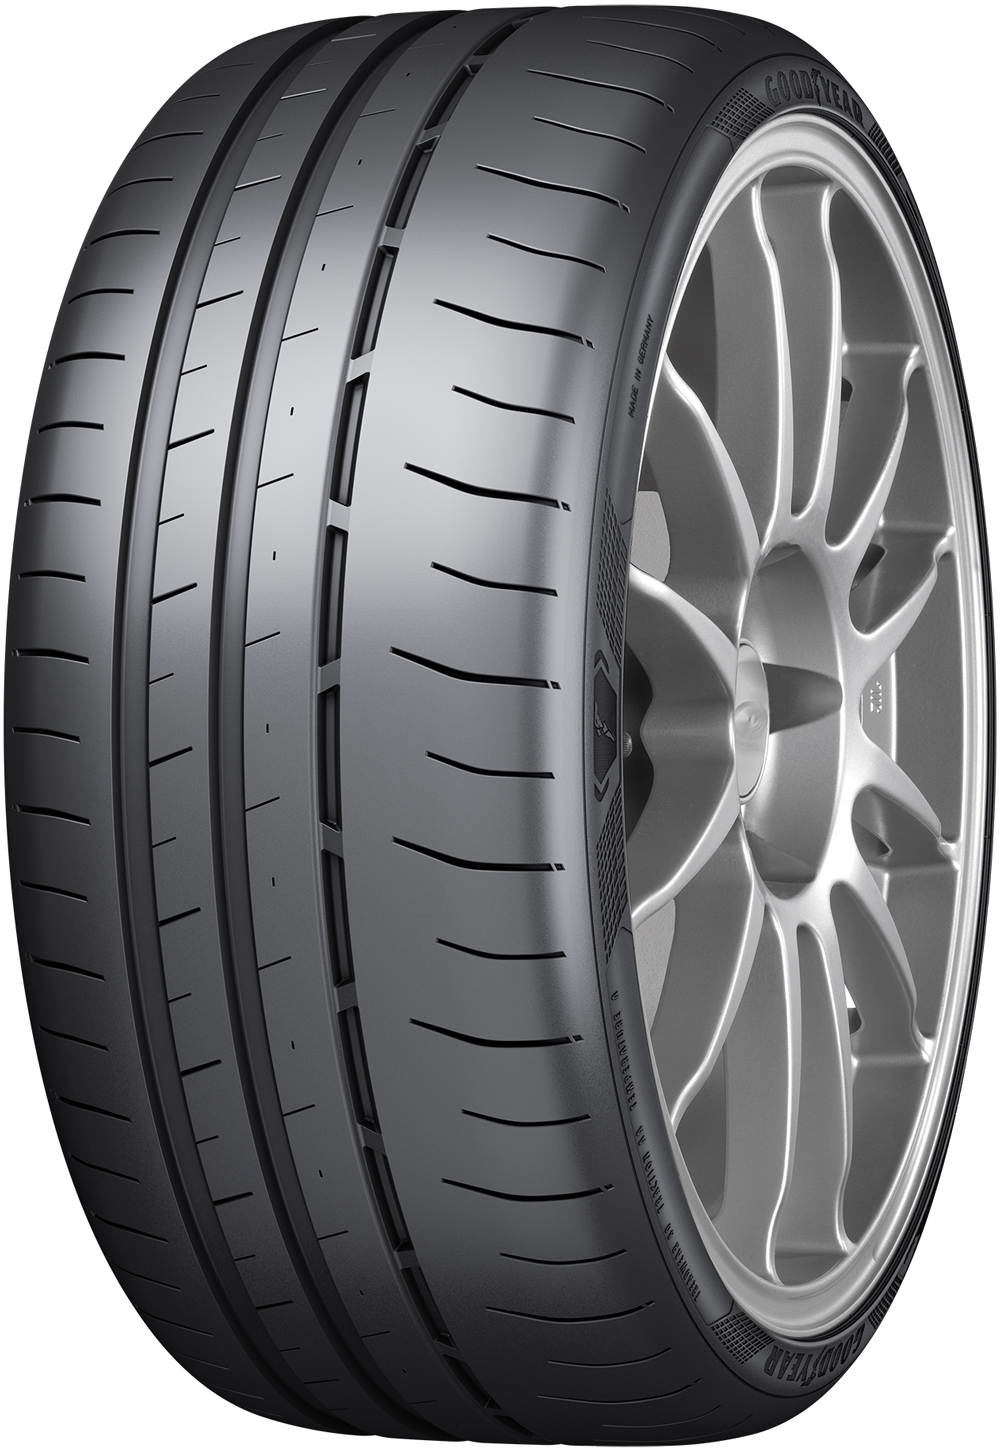 Anvelope auto GOODYEAR EAGLE F1 SUPERSPORT R XL FP 265/35 R20 99